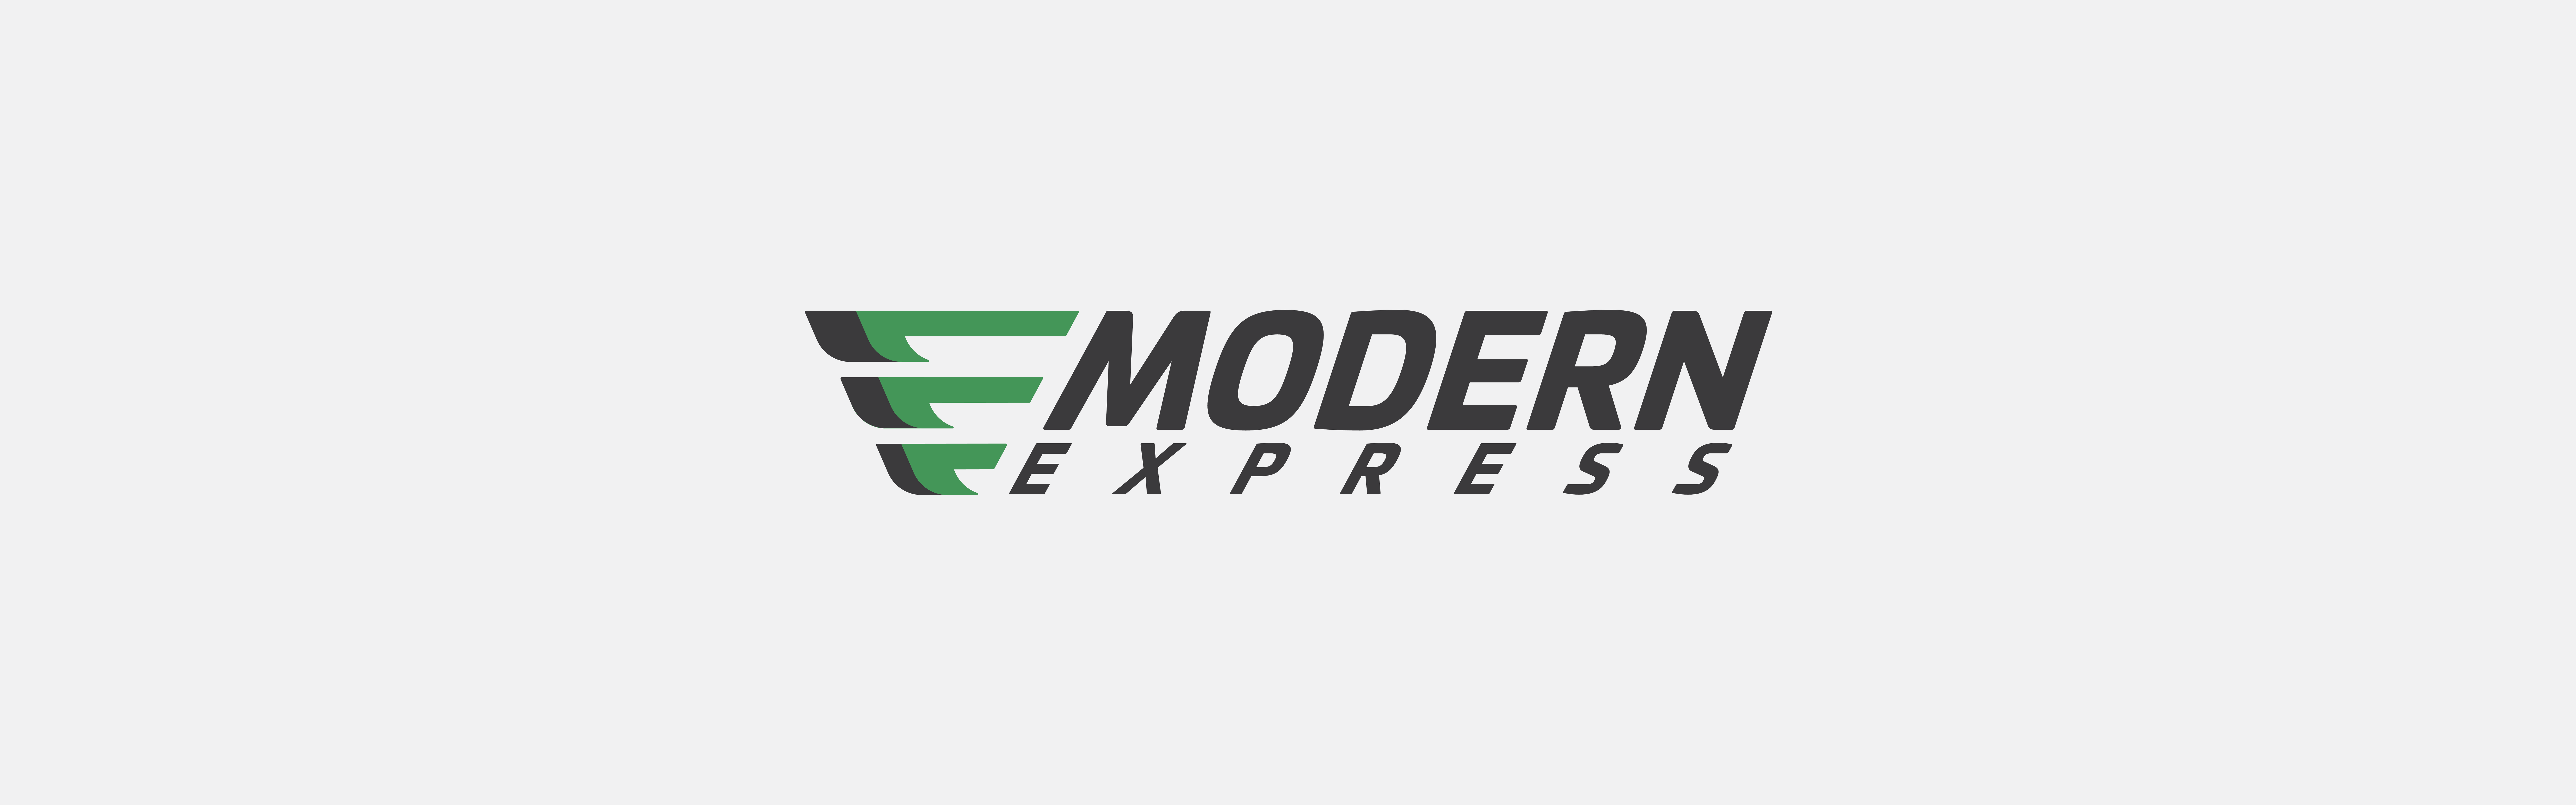 Logo of "Modern Express" featuring a stylized letter "e" with green elements on a white background.